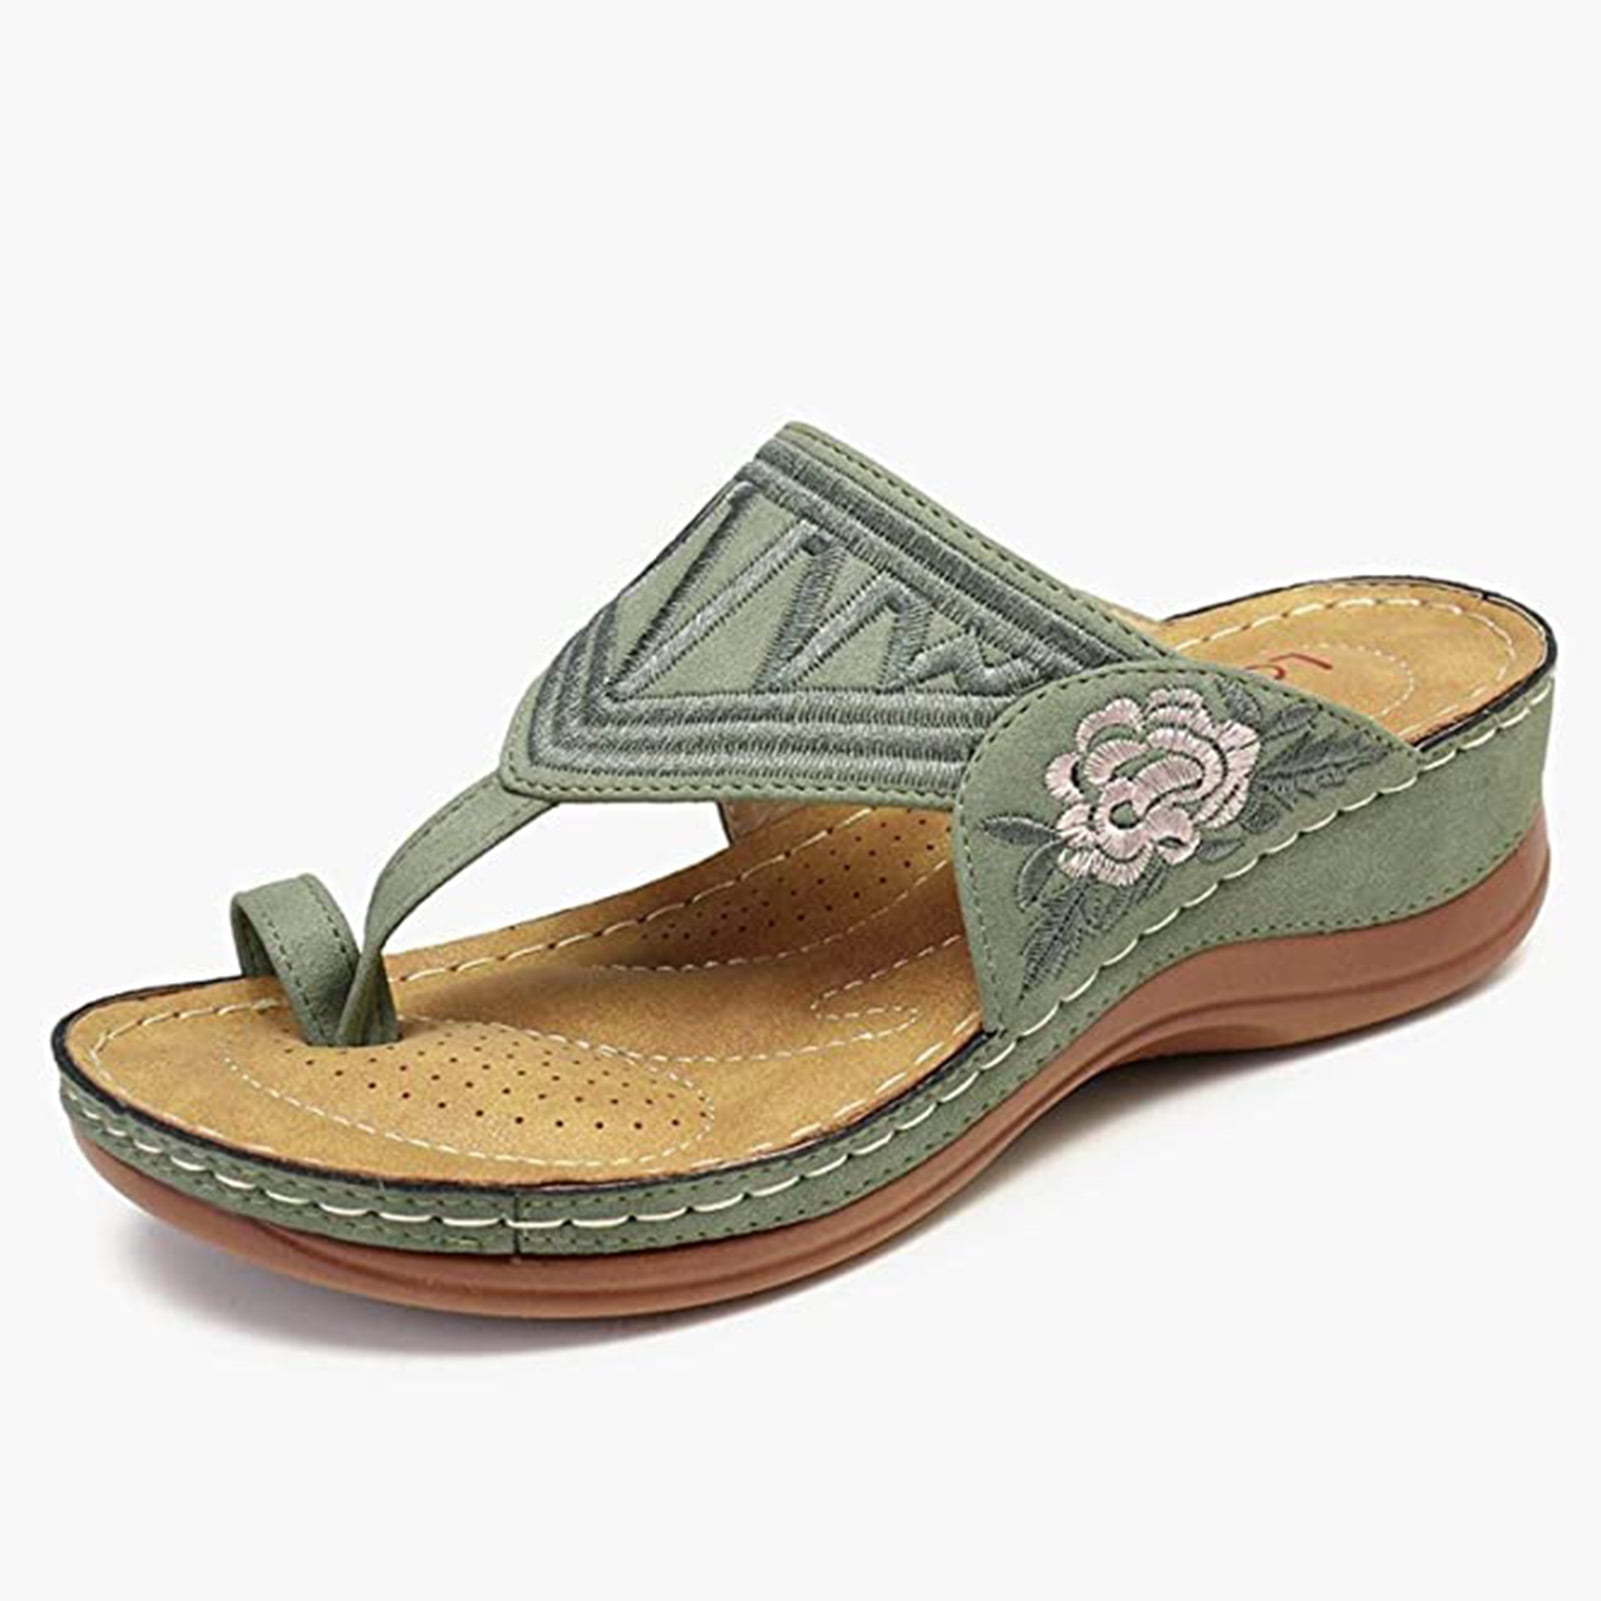 Embroidery Orthopedic Comfy Flip Flop Sandals for Women 3-arch Support ...